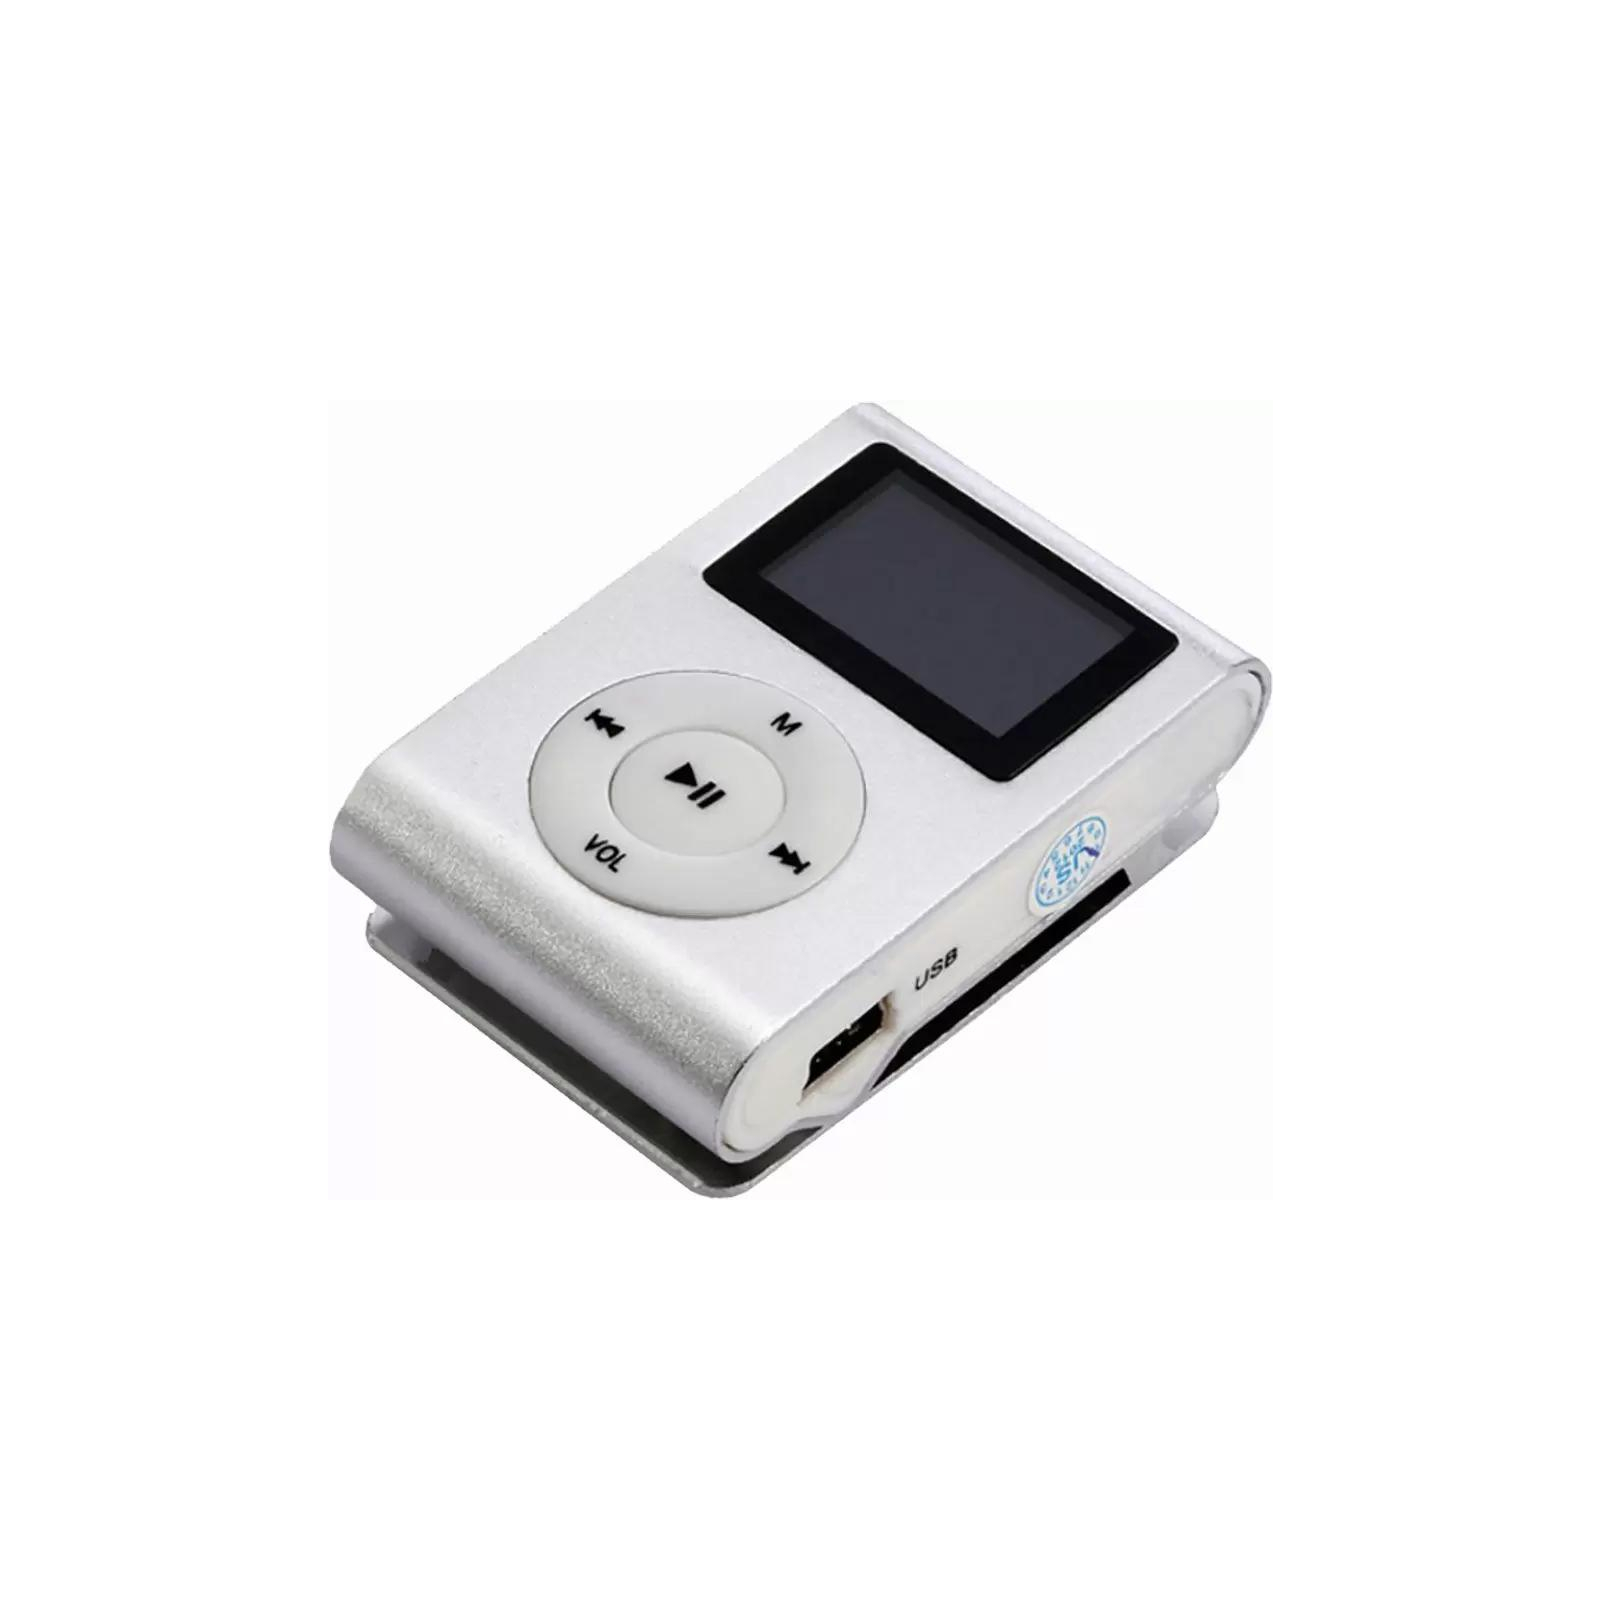 MP3 плеер Toto With display&Earphone Mp3 Blue (TPS-02-Blue)